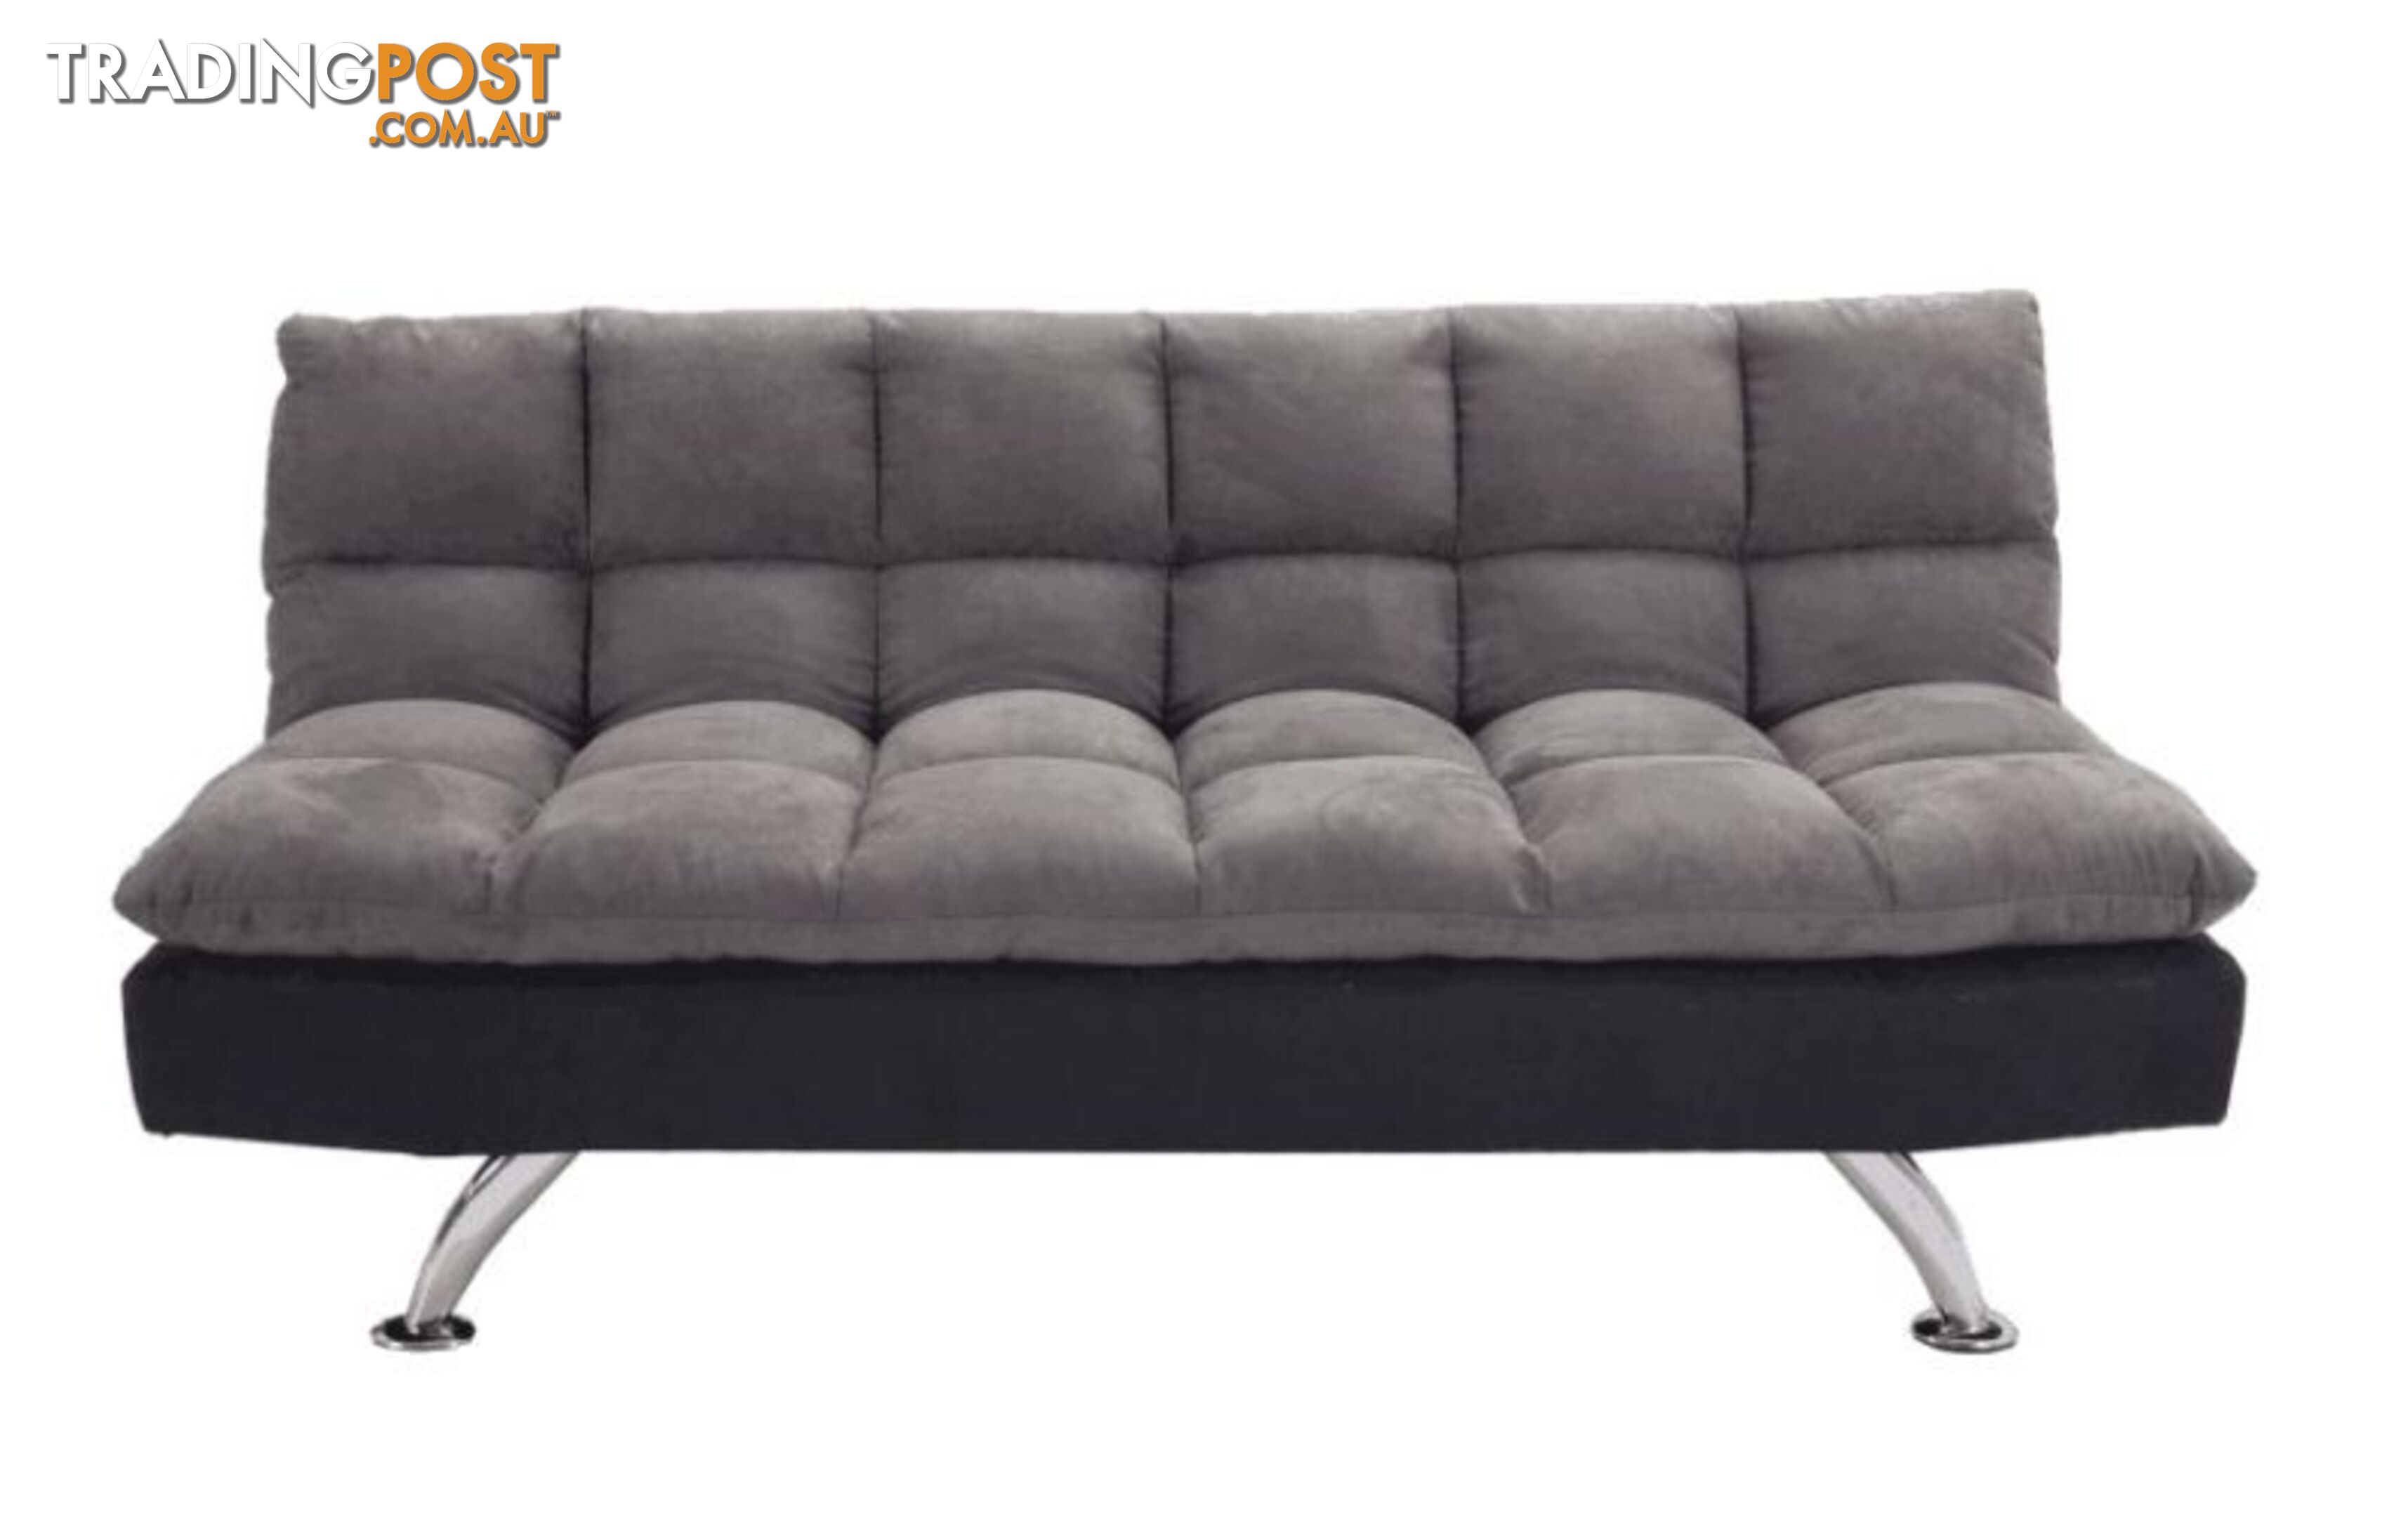 Brand New Grey Fabric Sofa Bed Couch Loung (SA084)